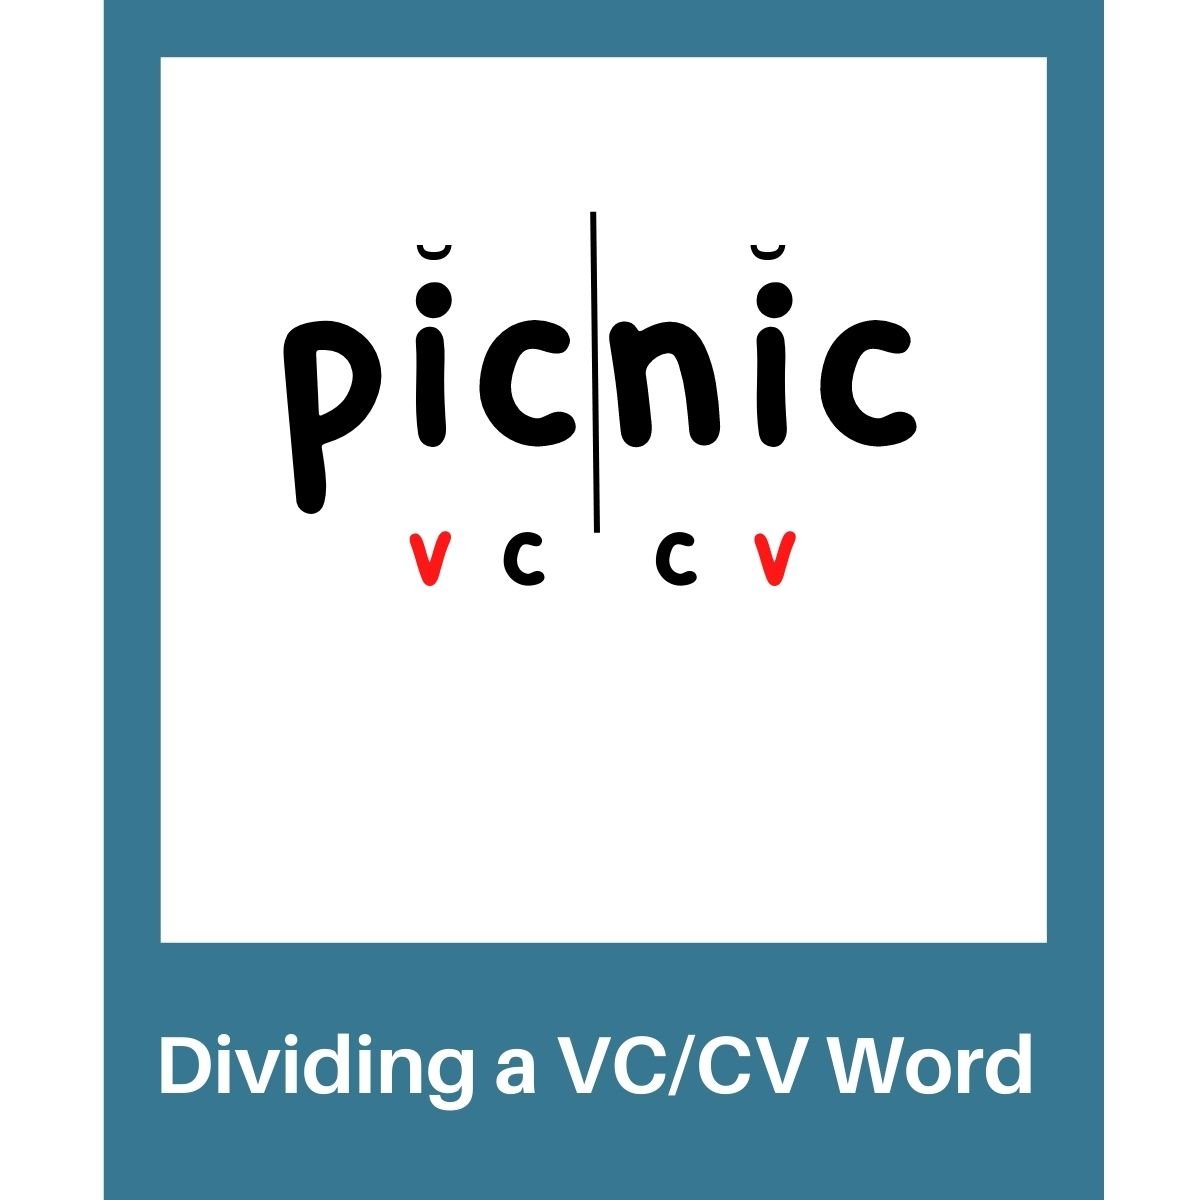 Sample word 'picnic' divided into syllables and marked with V,C,C,V and breve marks.